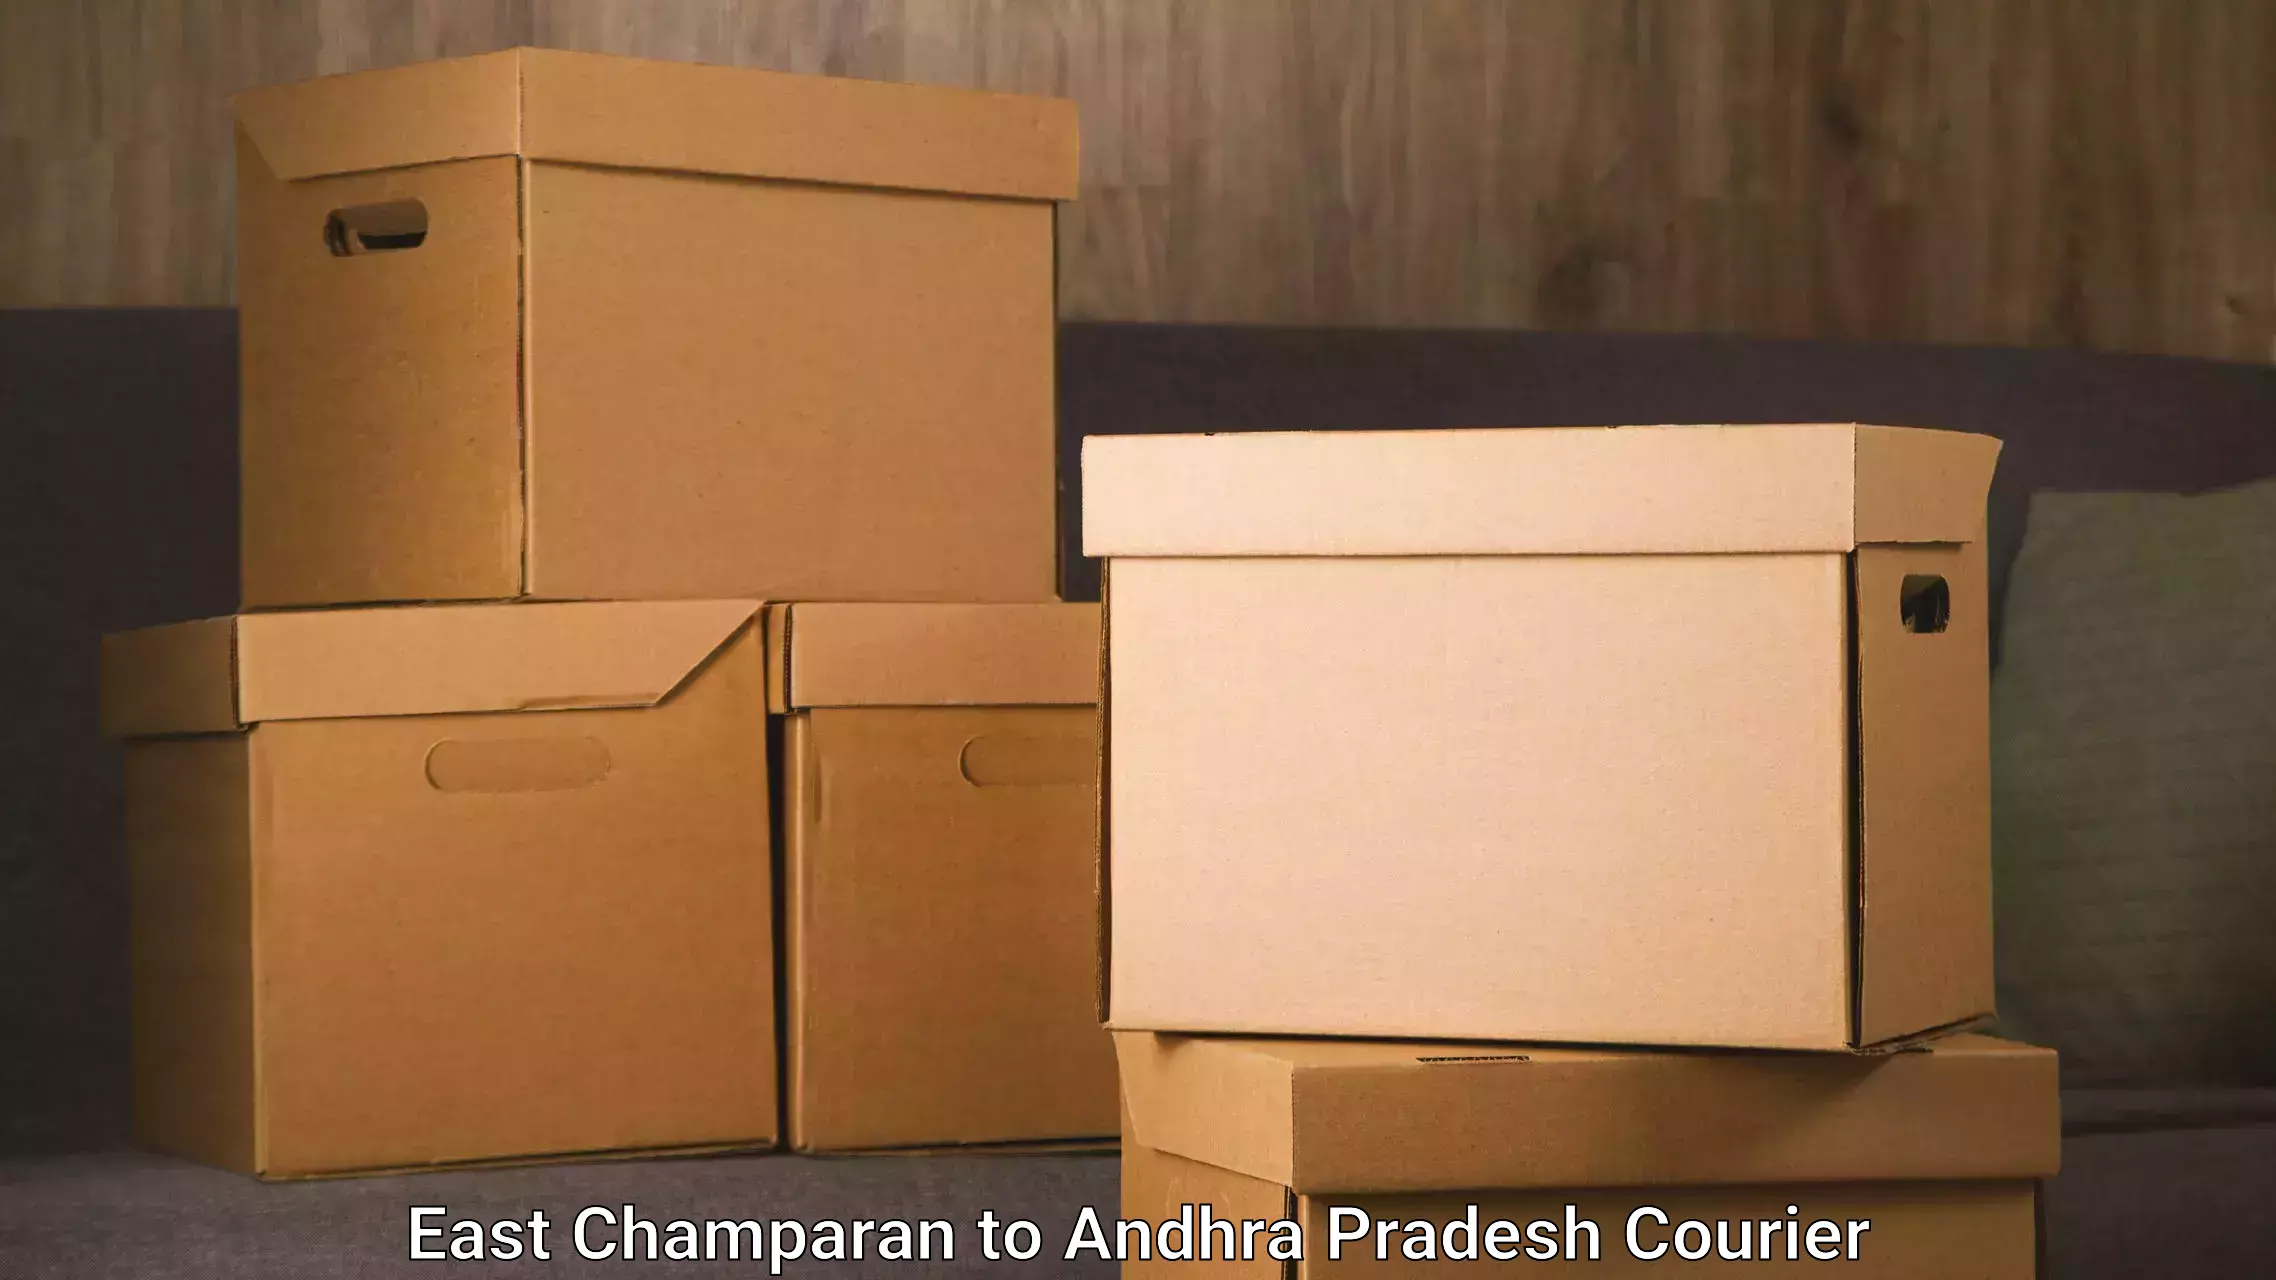 Furniture transport specialists East Champaran to Gajapathinagaram